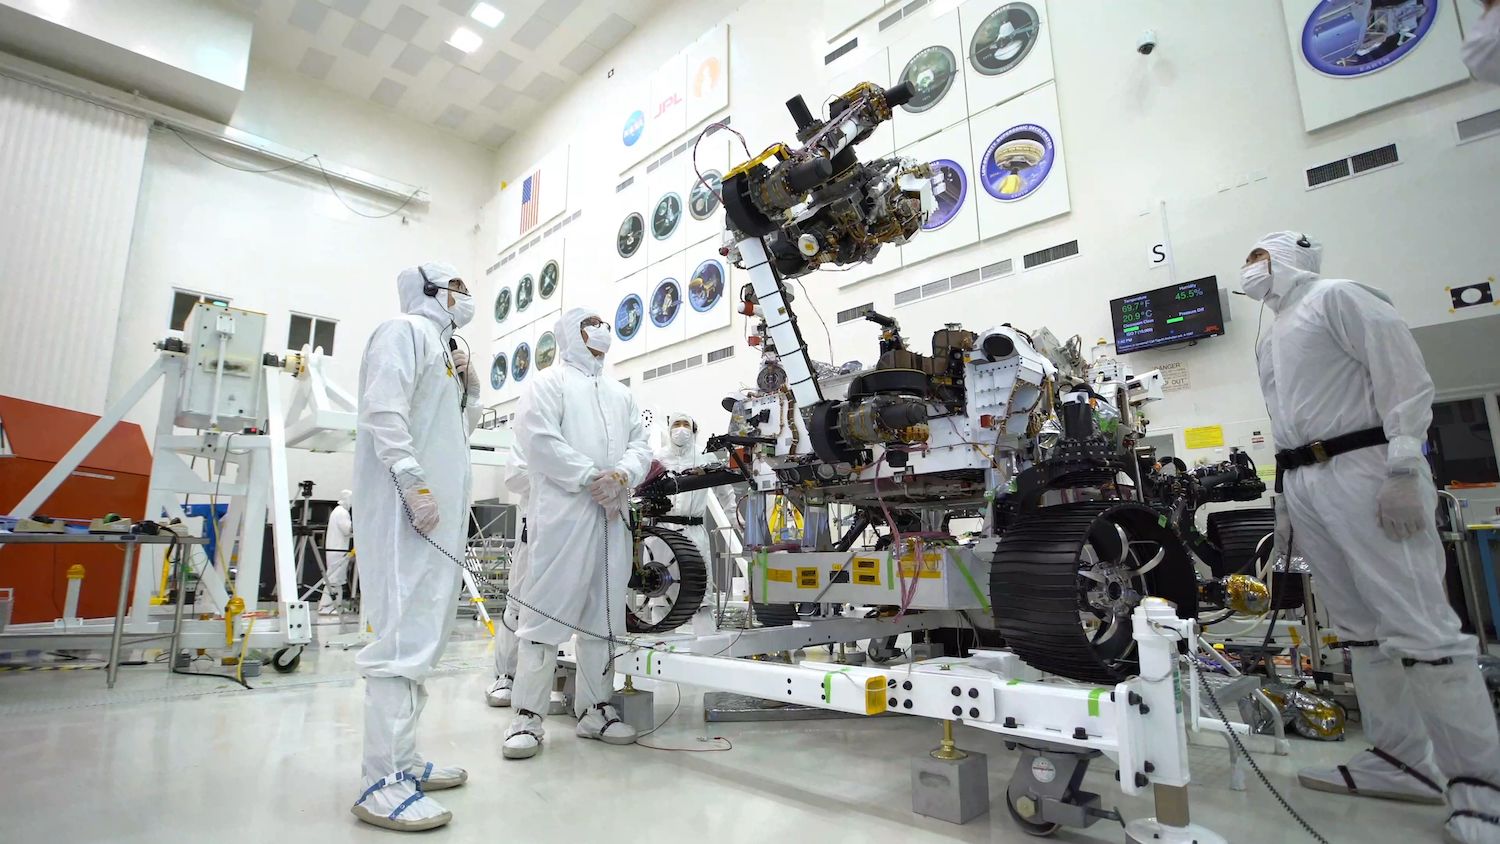 nasa scientists in white sanitation gowns and masks assess and test a mars rover in a lab